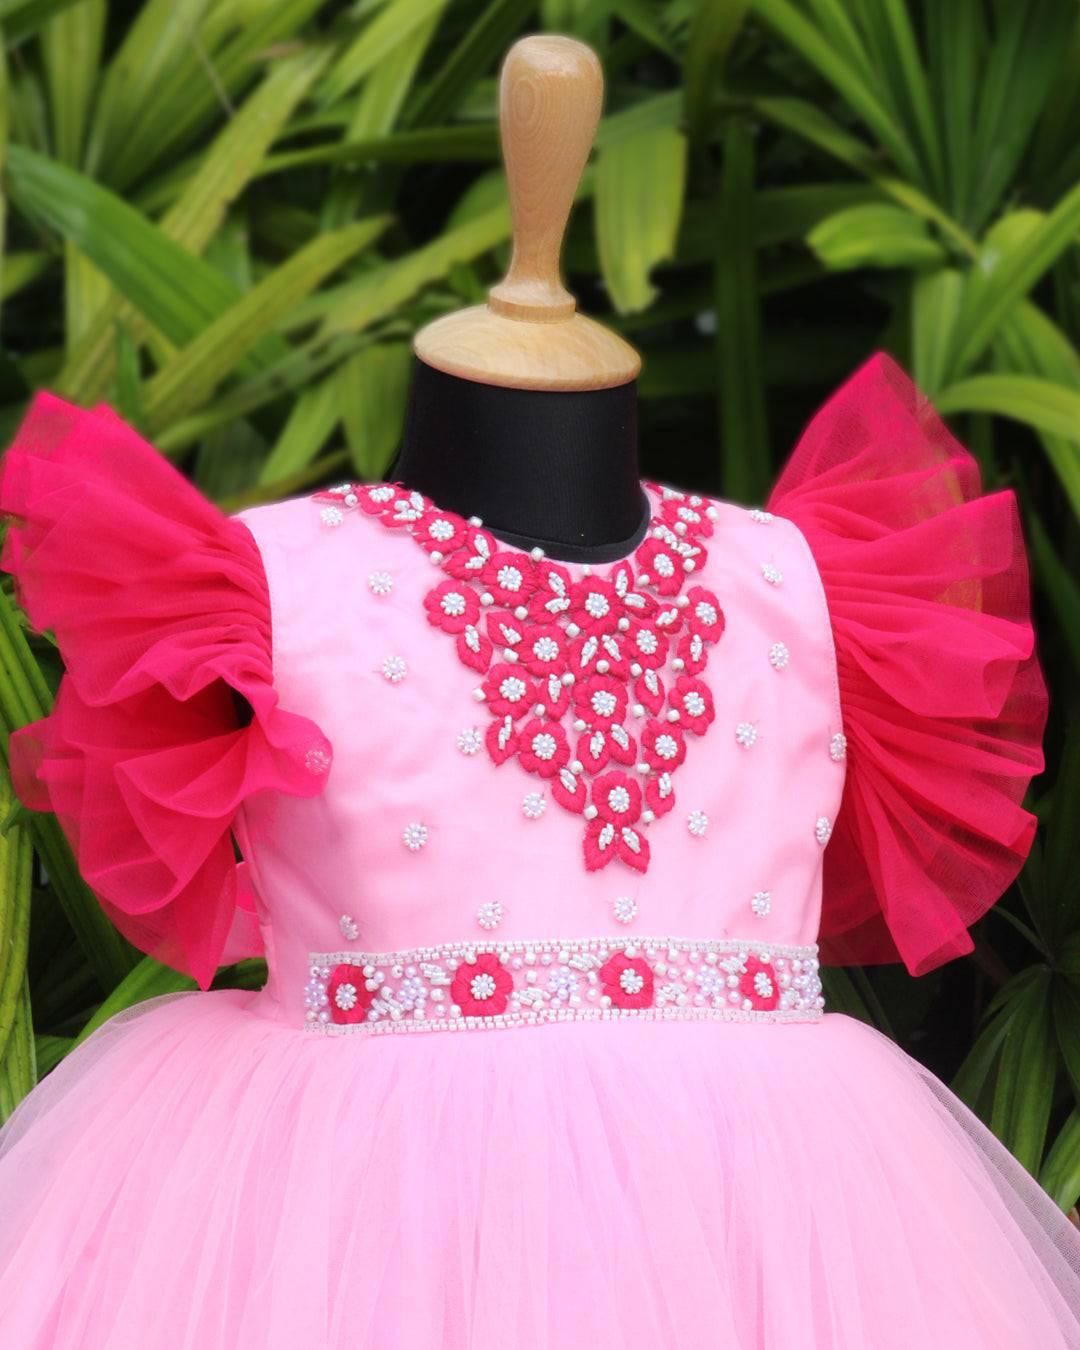 Baby Pink Heavy Hand Embroidery Frock
Material: Baby pink and rani pink combination heavy hand embroidery border Frock. Baby pink satin material is used for the main portion of the frock and Rani shade 